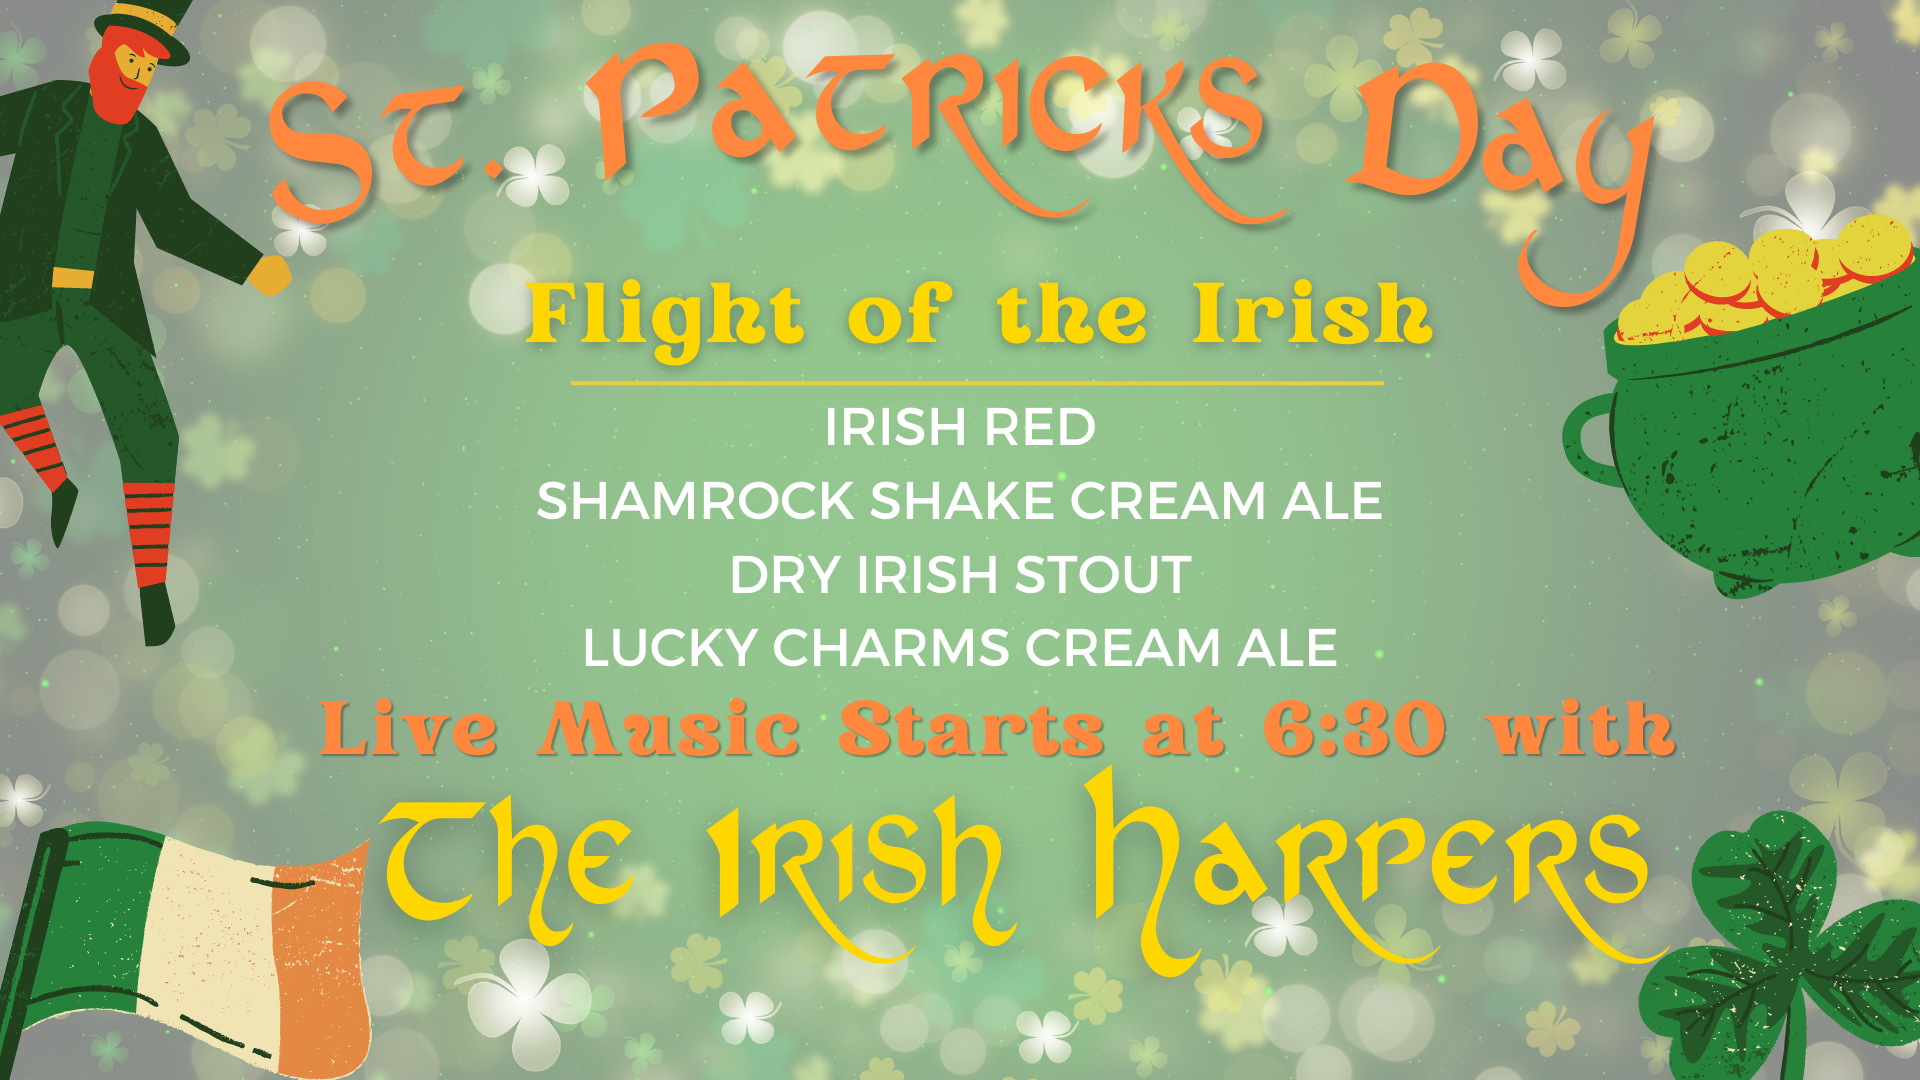 St. Patricks Day at Czig Meister Brewing Company featuring live music and a special flight of the Irish